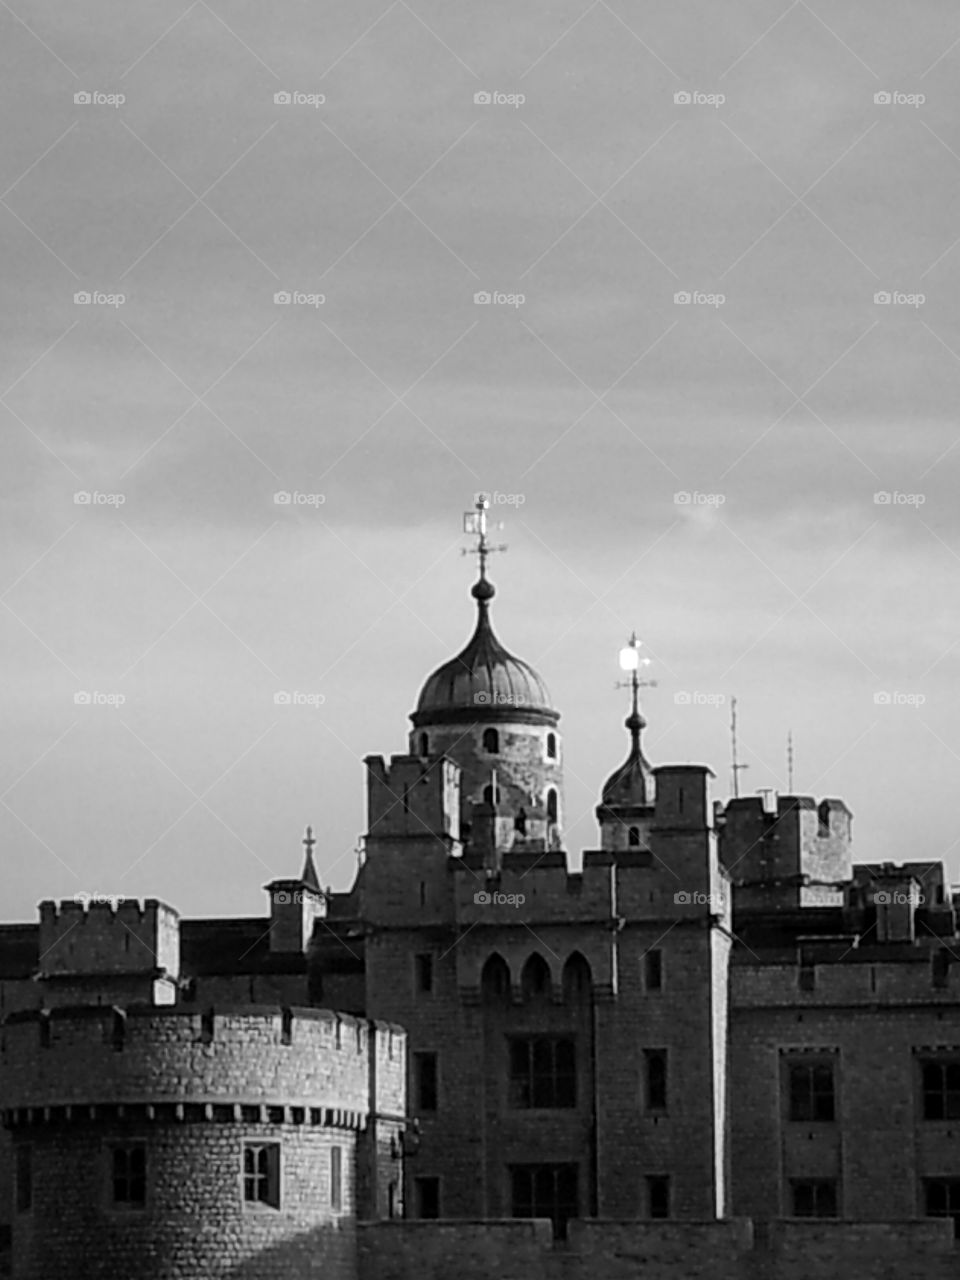 Tower of London in black and white